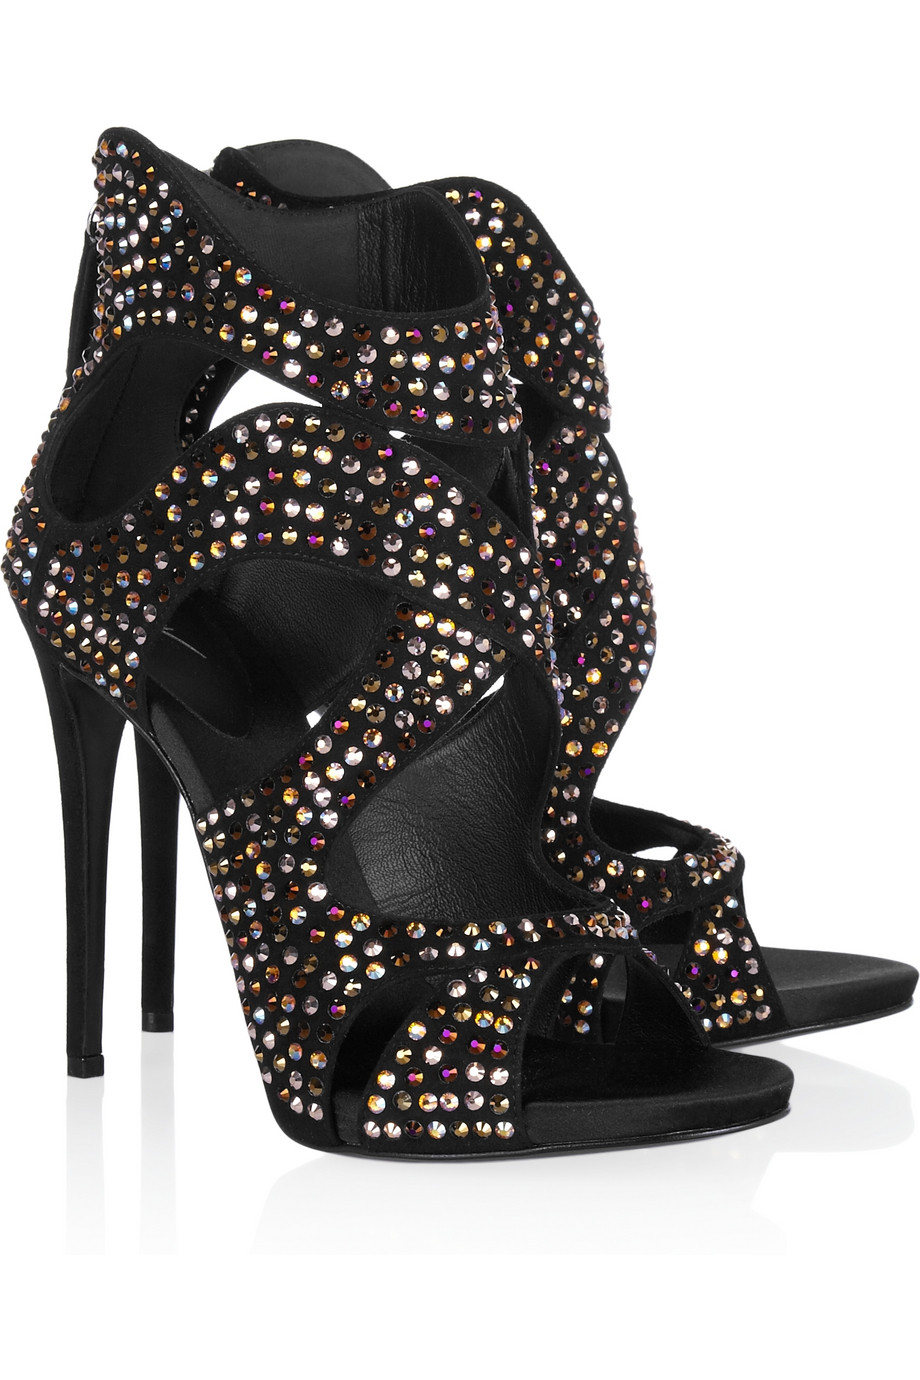 Giuseppe Zanotti Crystal Embellished Suede Sandals in Black - Lyst